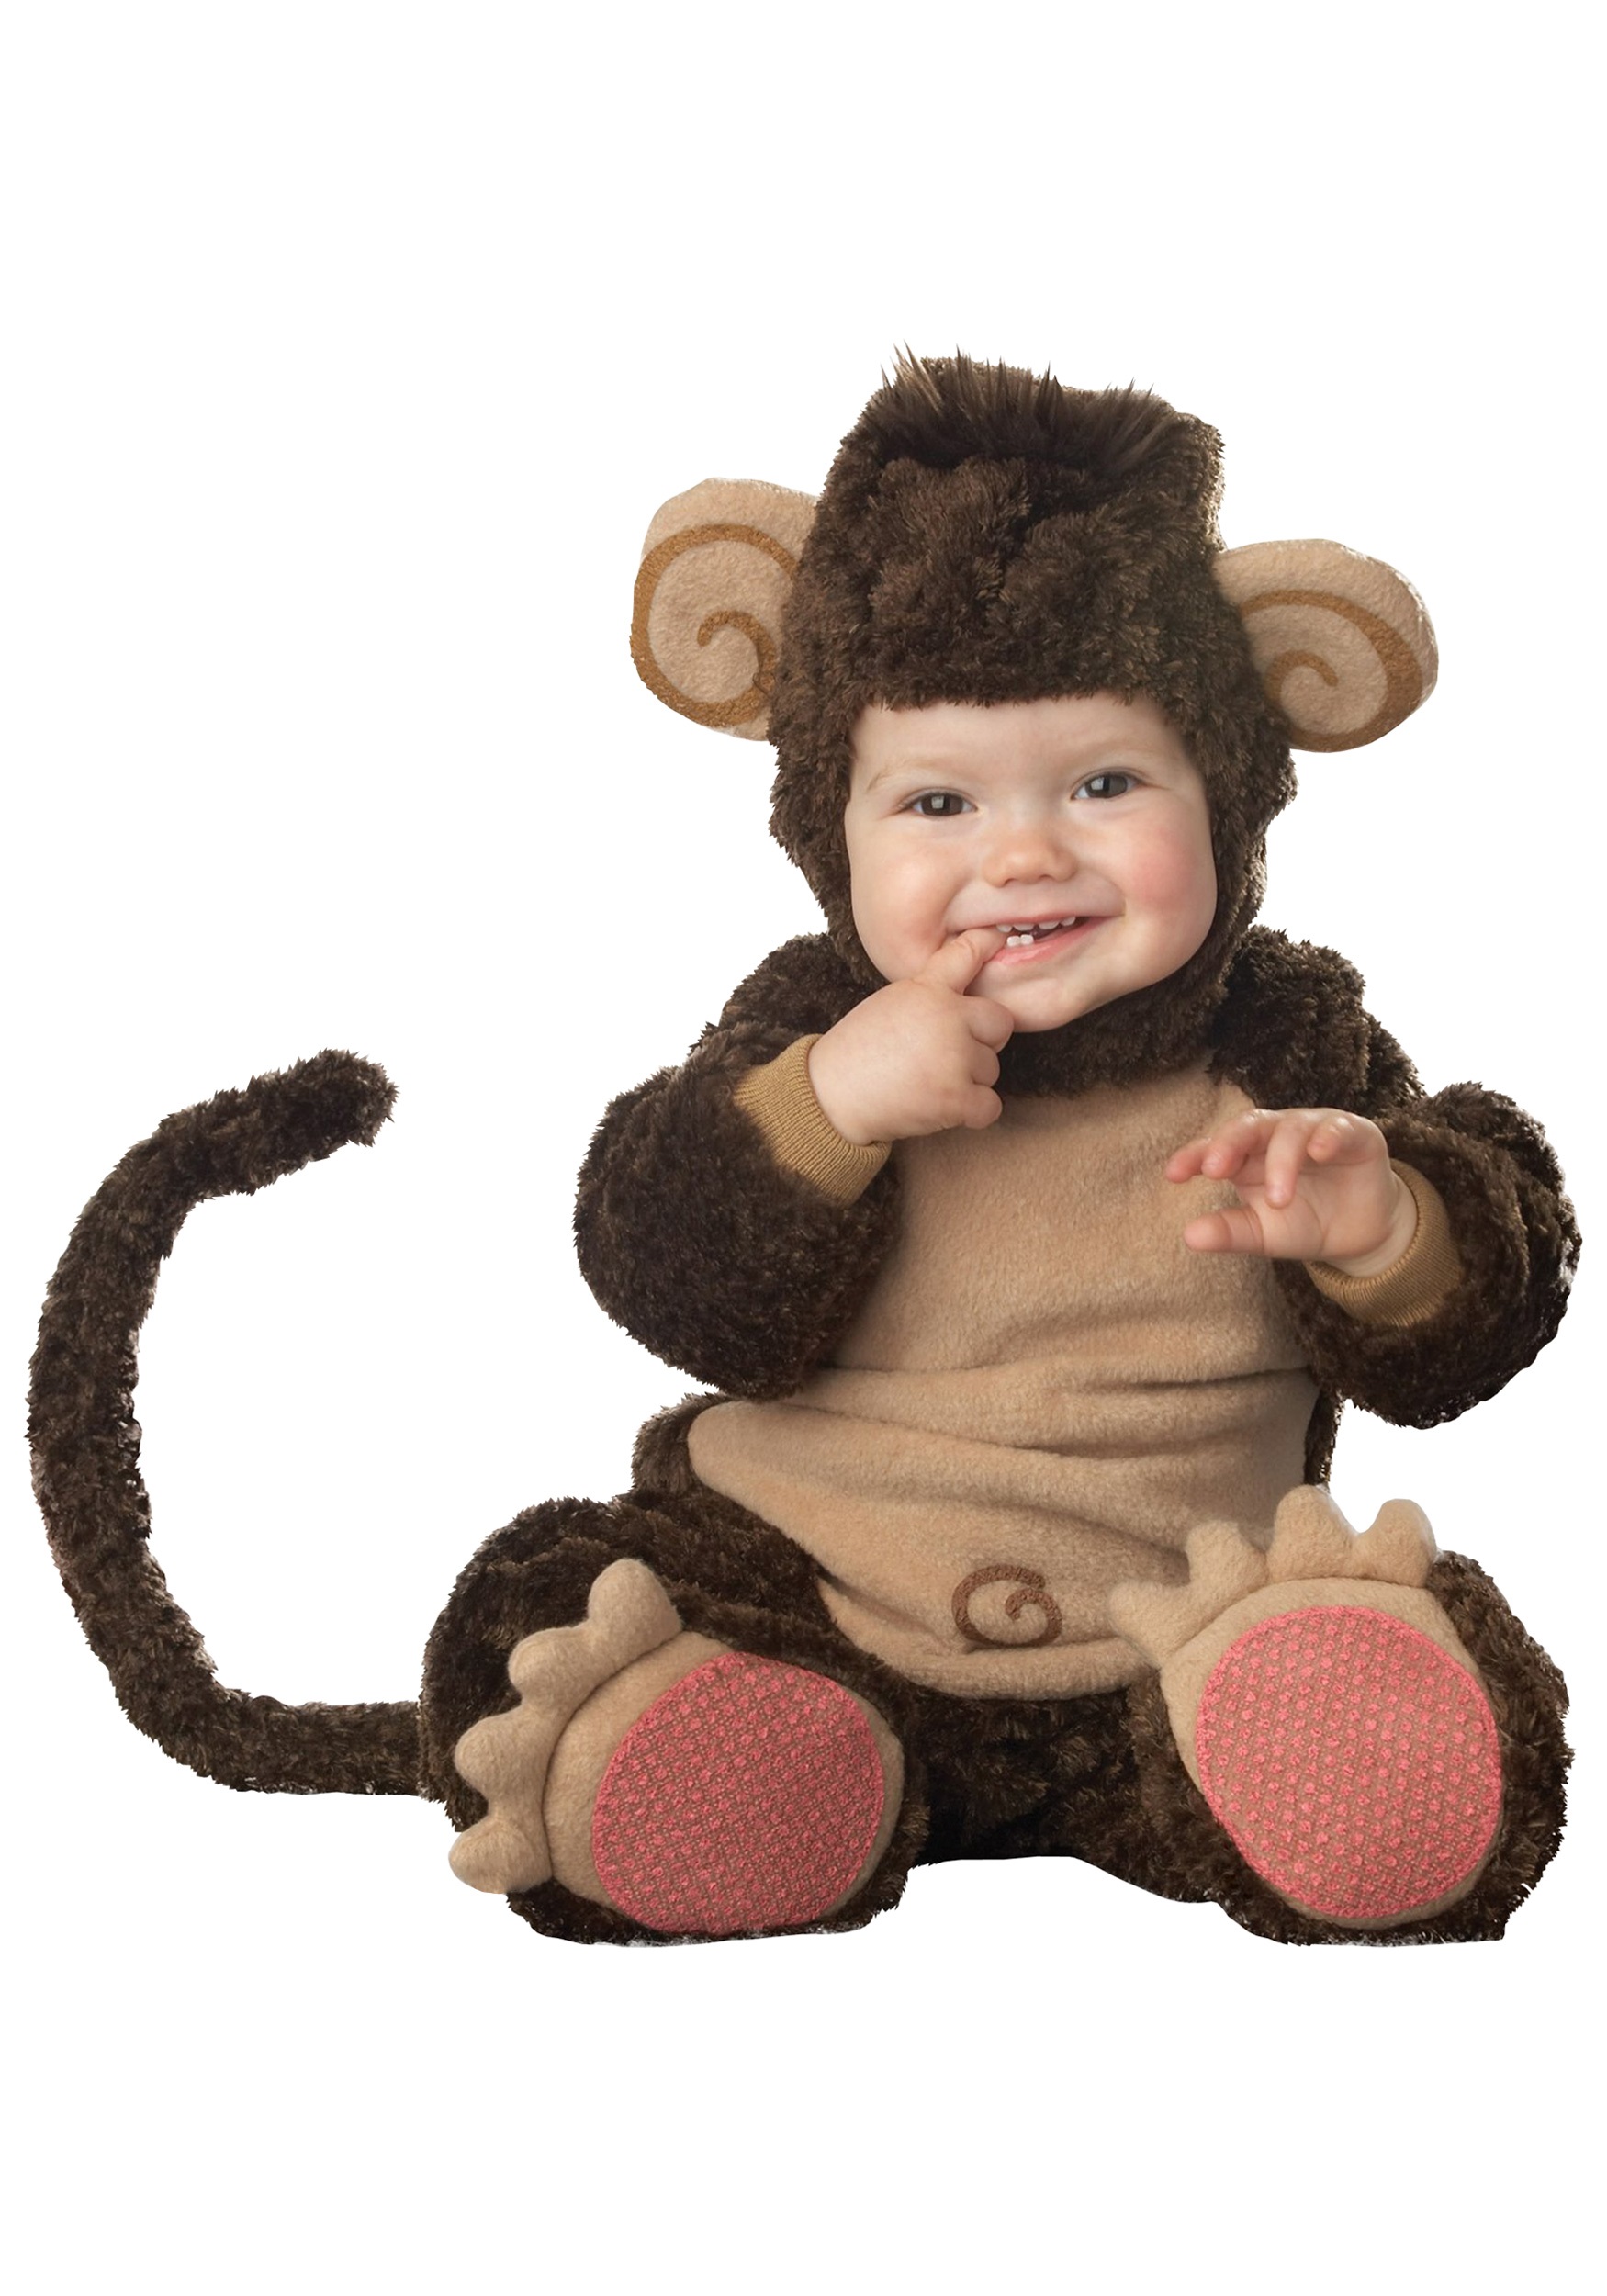 Photos - Fancy Dress Character In  Lil Monkey Costume For Baby | Warm Halloween Costume for Todd 